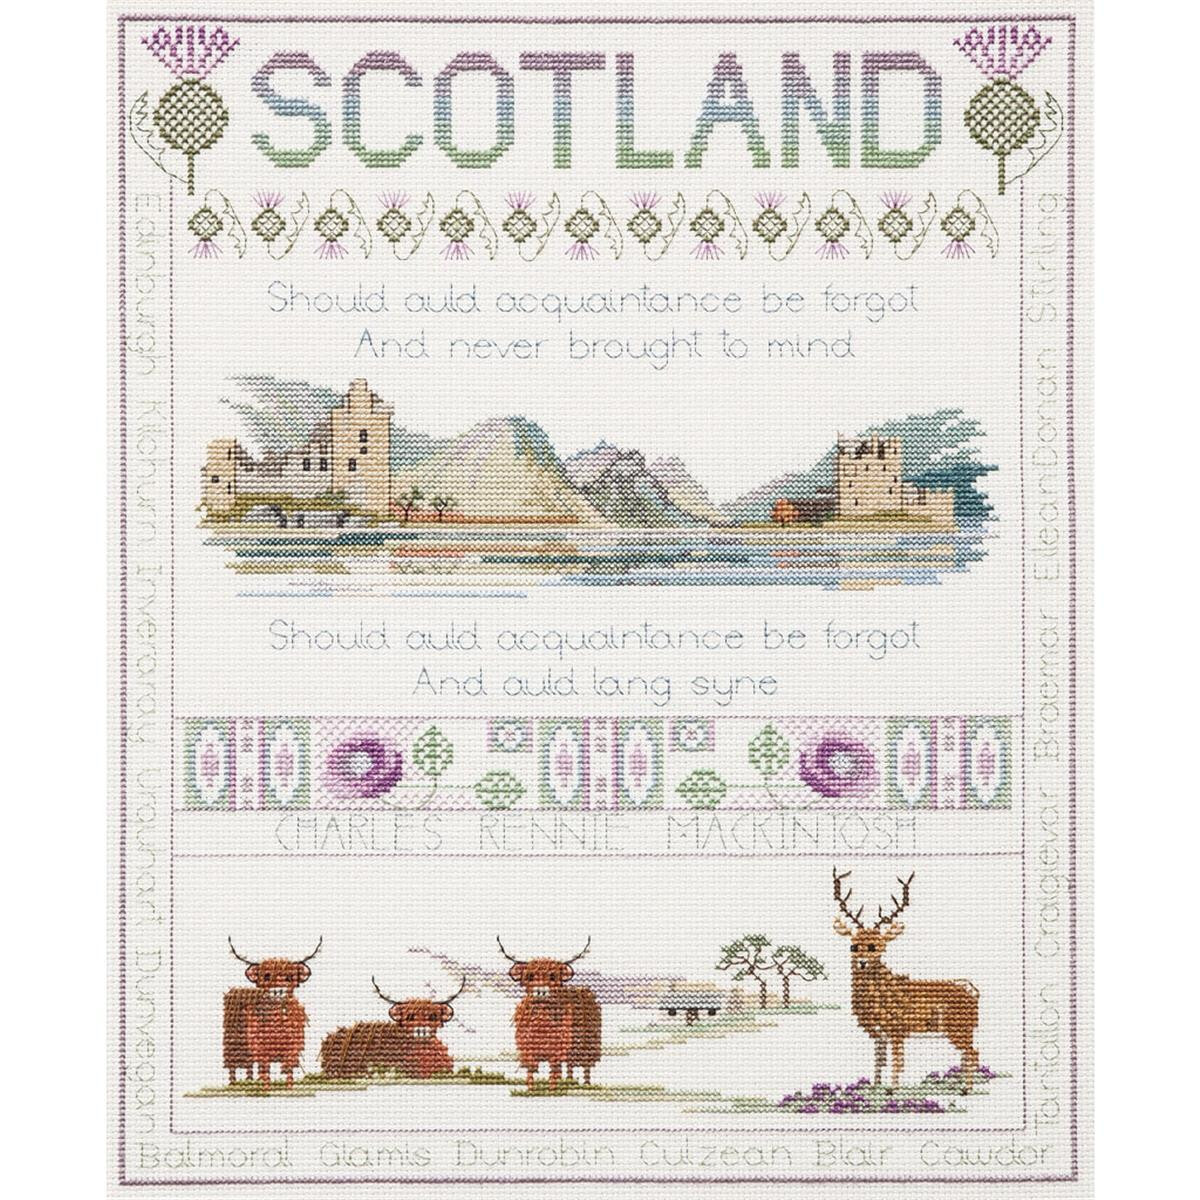 An intricate embroidery pack artwork with Scotland motifs...